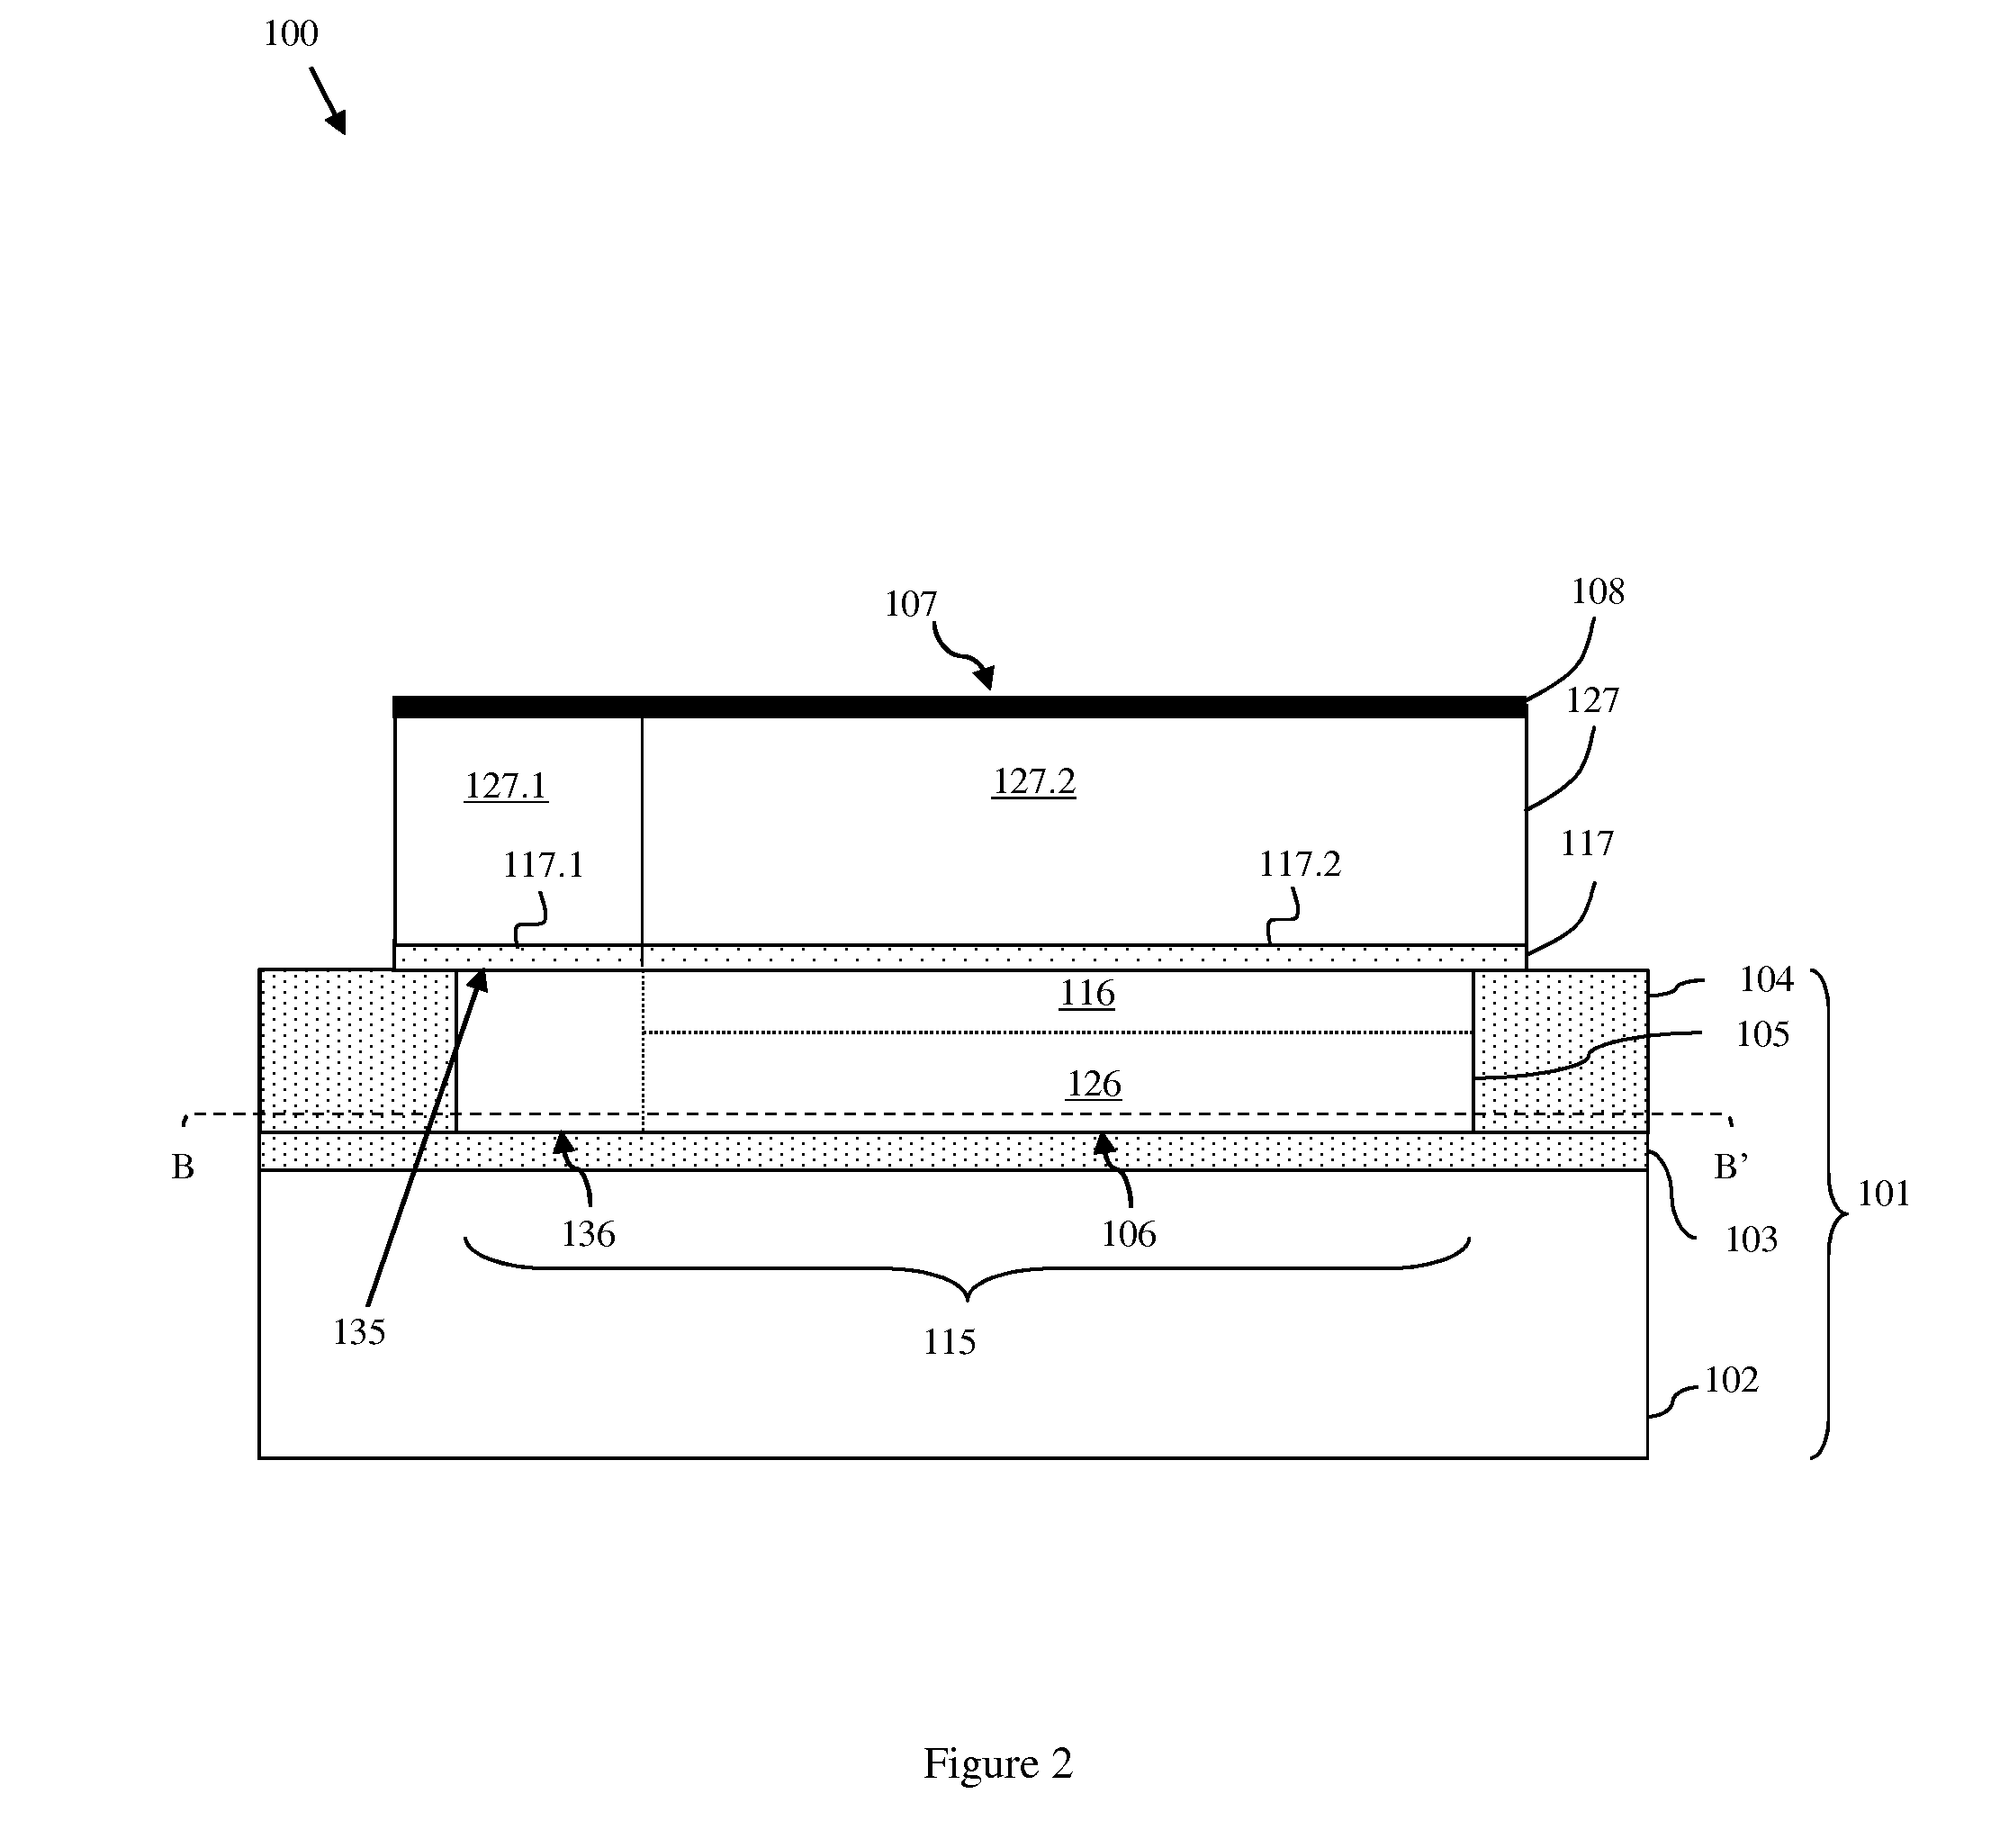 PARTIALLY DEPELETED (DP) SEMICONDUCTOR-ON-INSULATOR (SOI) FIELD EFFECT TRANSISTOR (FET) STRUCTURE WITH A GATE-TO-BODY TUNNEL CURRENT REGION FOR THRESHOLD VOLTAGE (Vt) LOWERING AND METHOD OF FORMING THE STRUCTURE